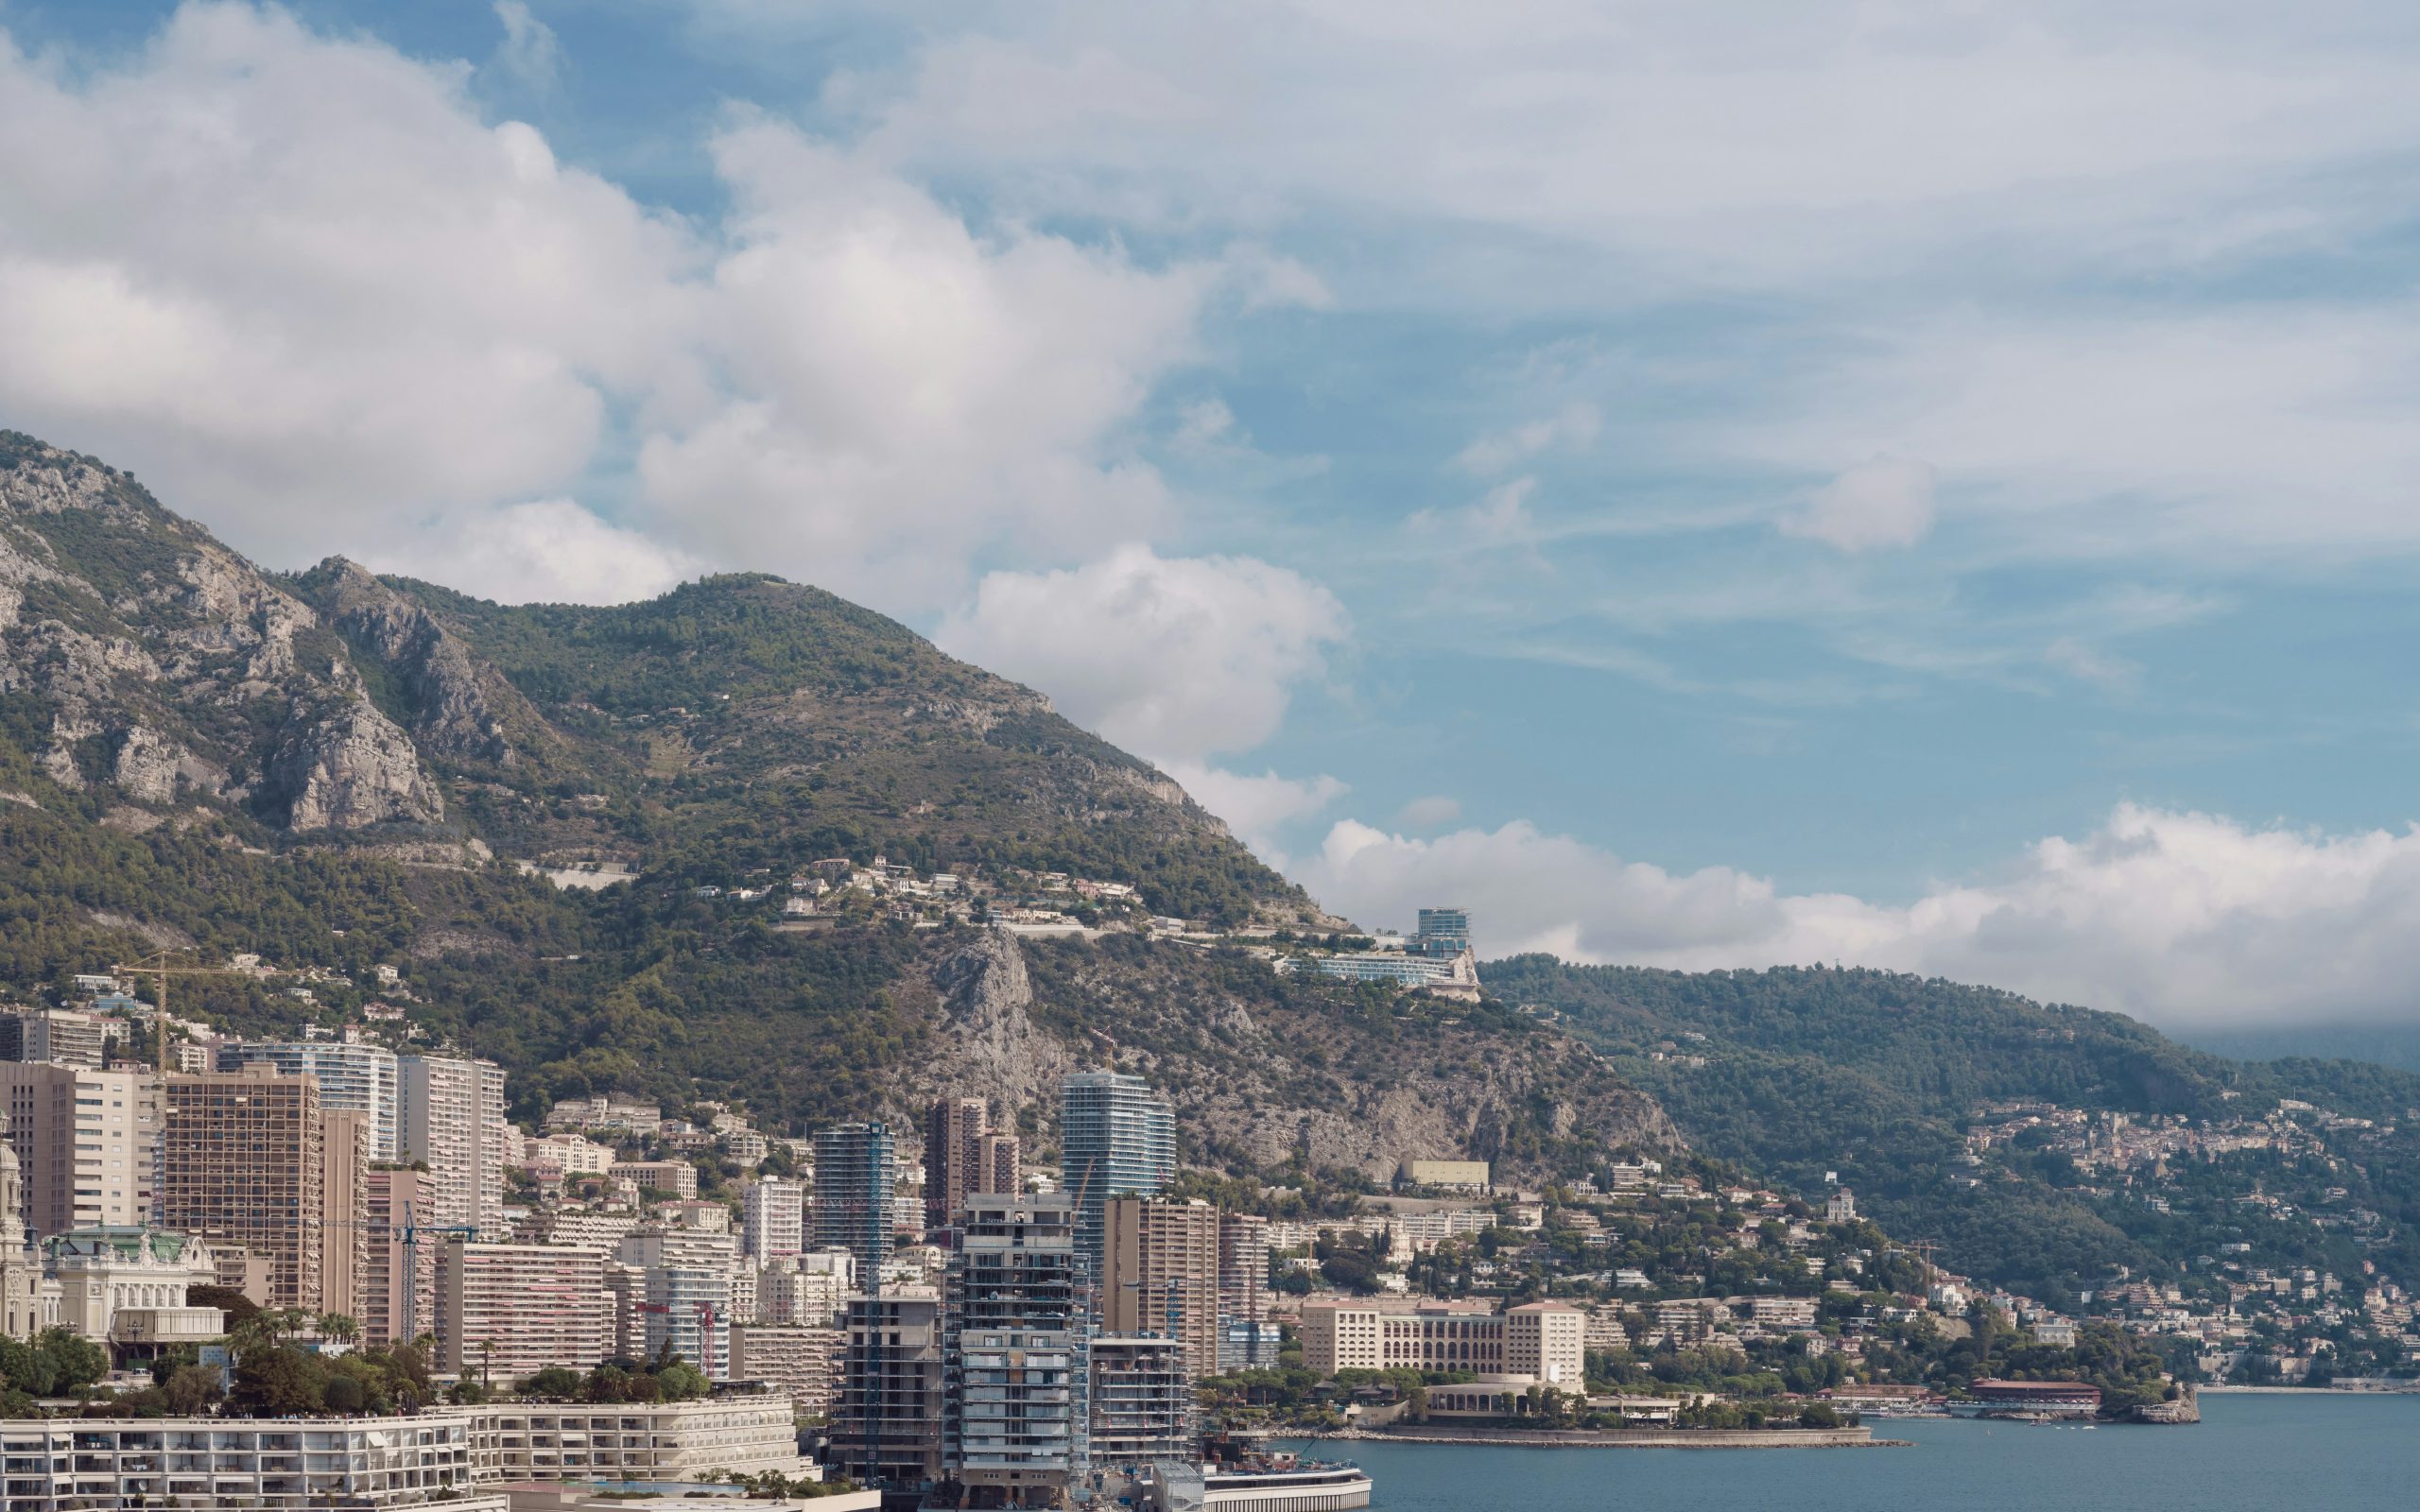 discover the allure of monaco tourism and explore its glamorous attractions, from world-class casinos and luxury yachts to stunning views of the mediterranean coast.